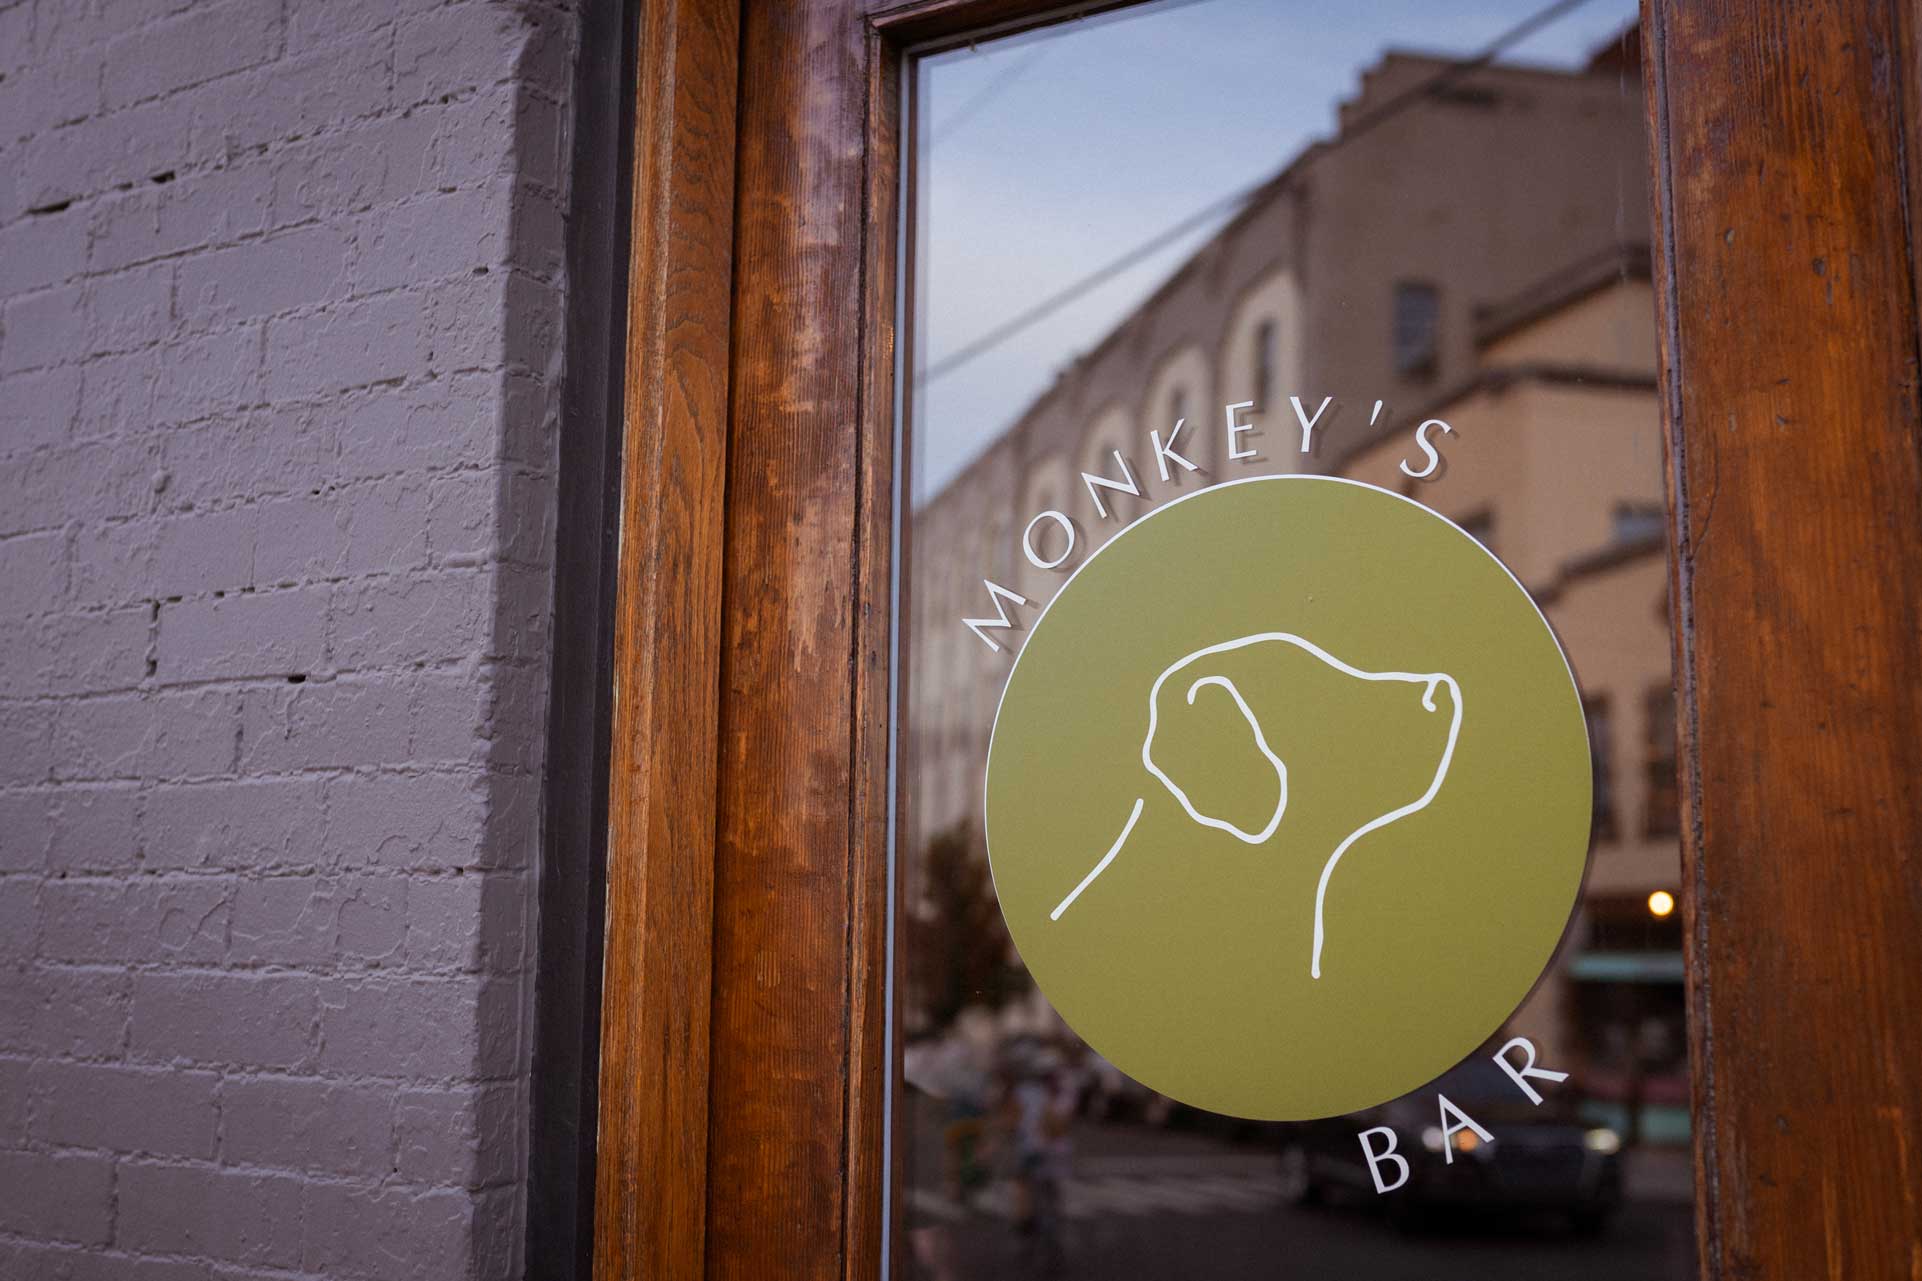 Downtown Knoxville bar Monkey's in Old City replaces Central Depot